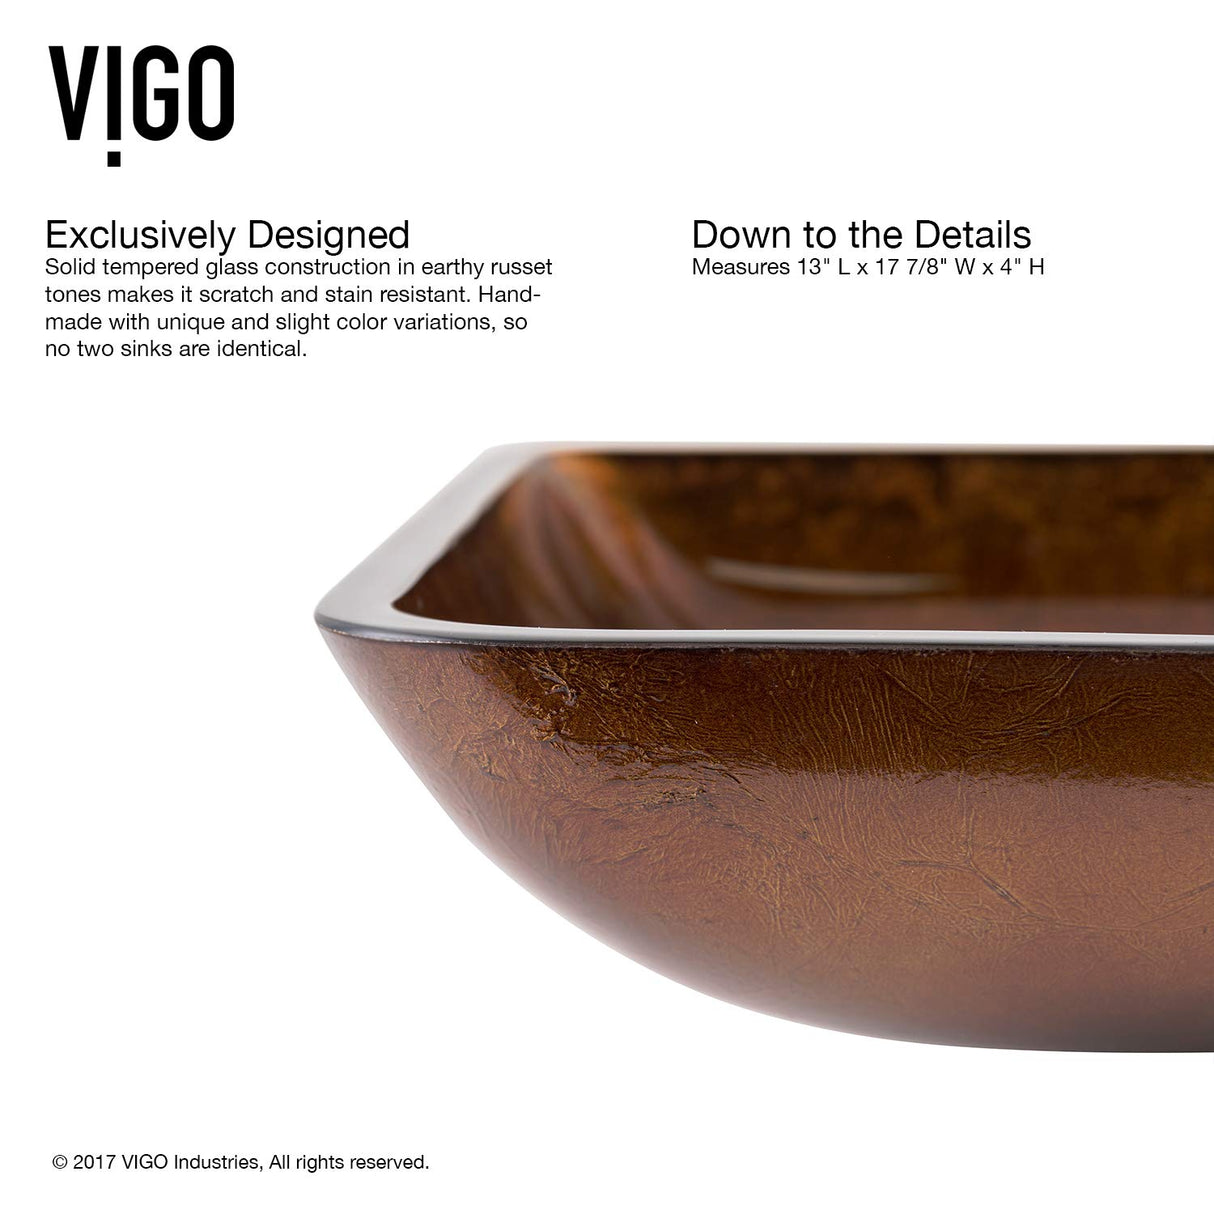 VIGO VGT1600 18.125" L -13.0" W -12.38" H Handmade Countertop Glass Rectangular Vessel Bathroom Sink Set in Red and Brown Fusion Finish with Antique Rubbed Bronze Single-Handle Faucet and Pop Up Drain